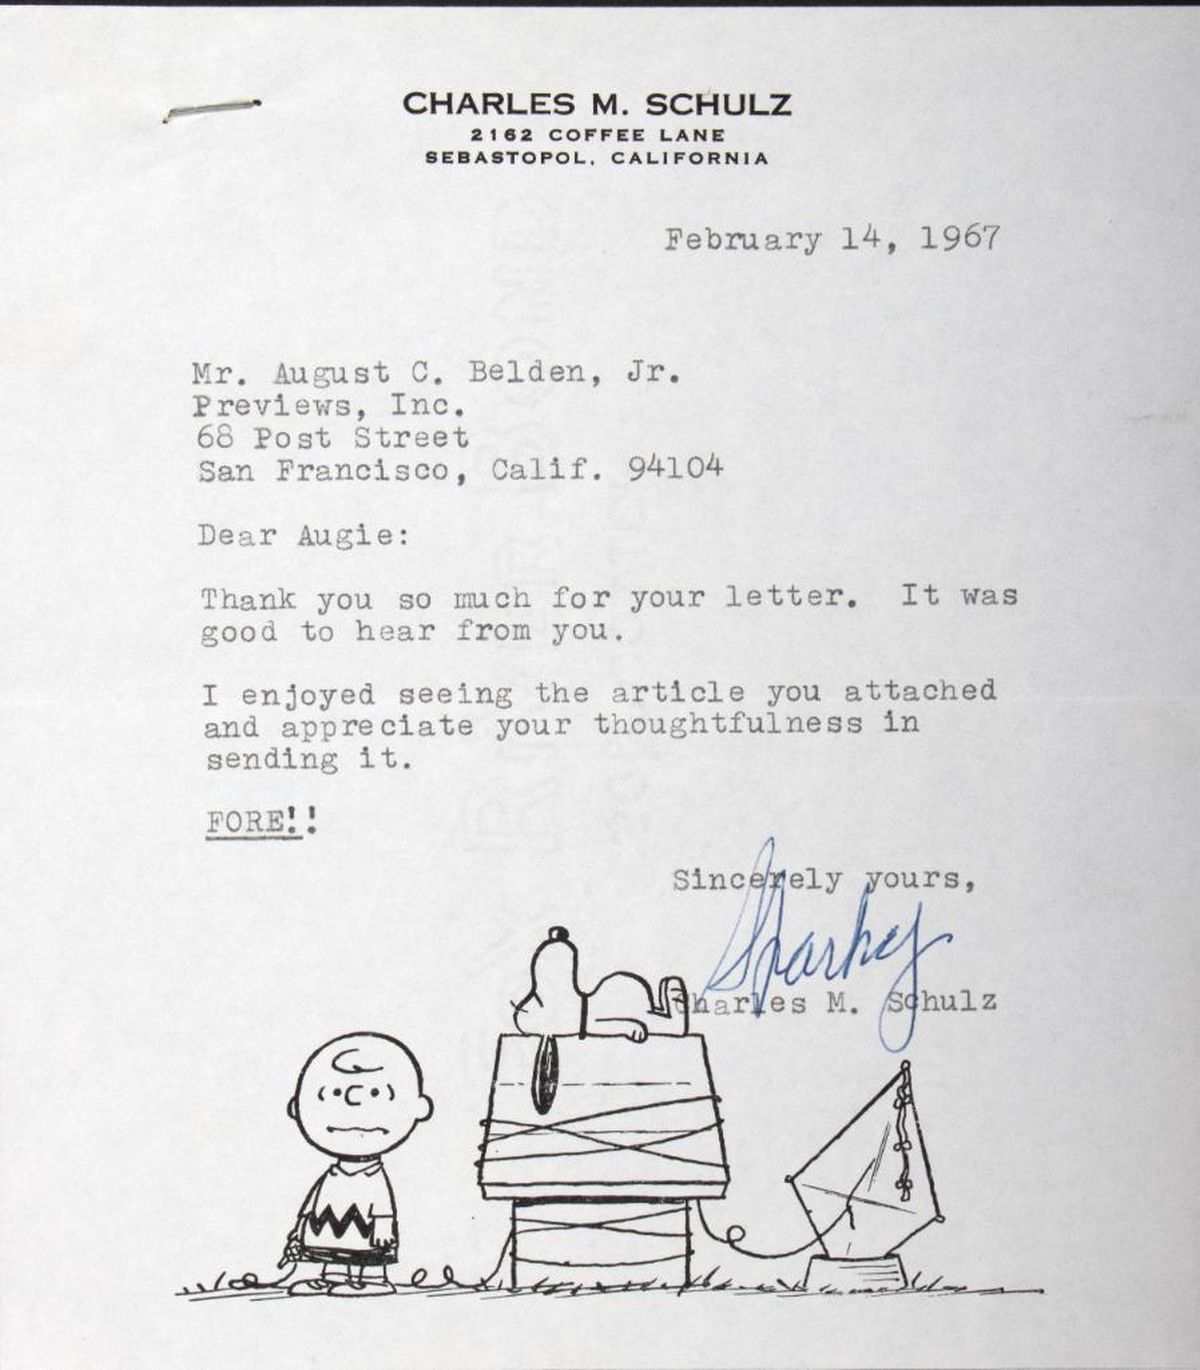 Charles M. Schulz Autographed Letter - Image 2 of 5